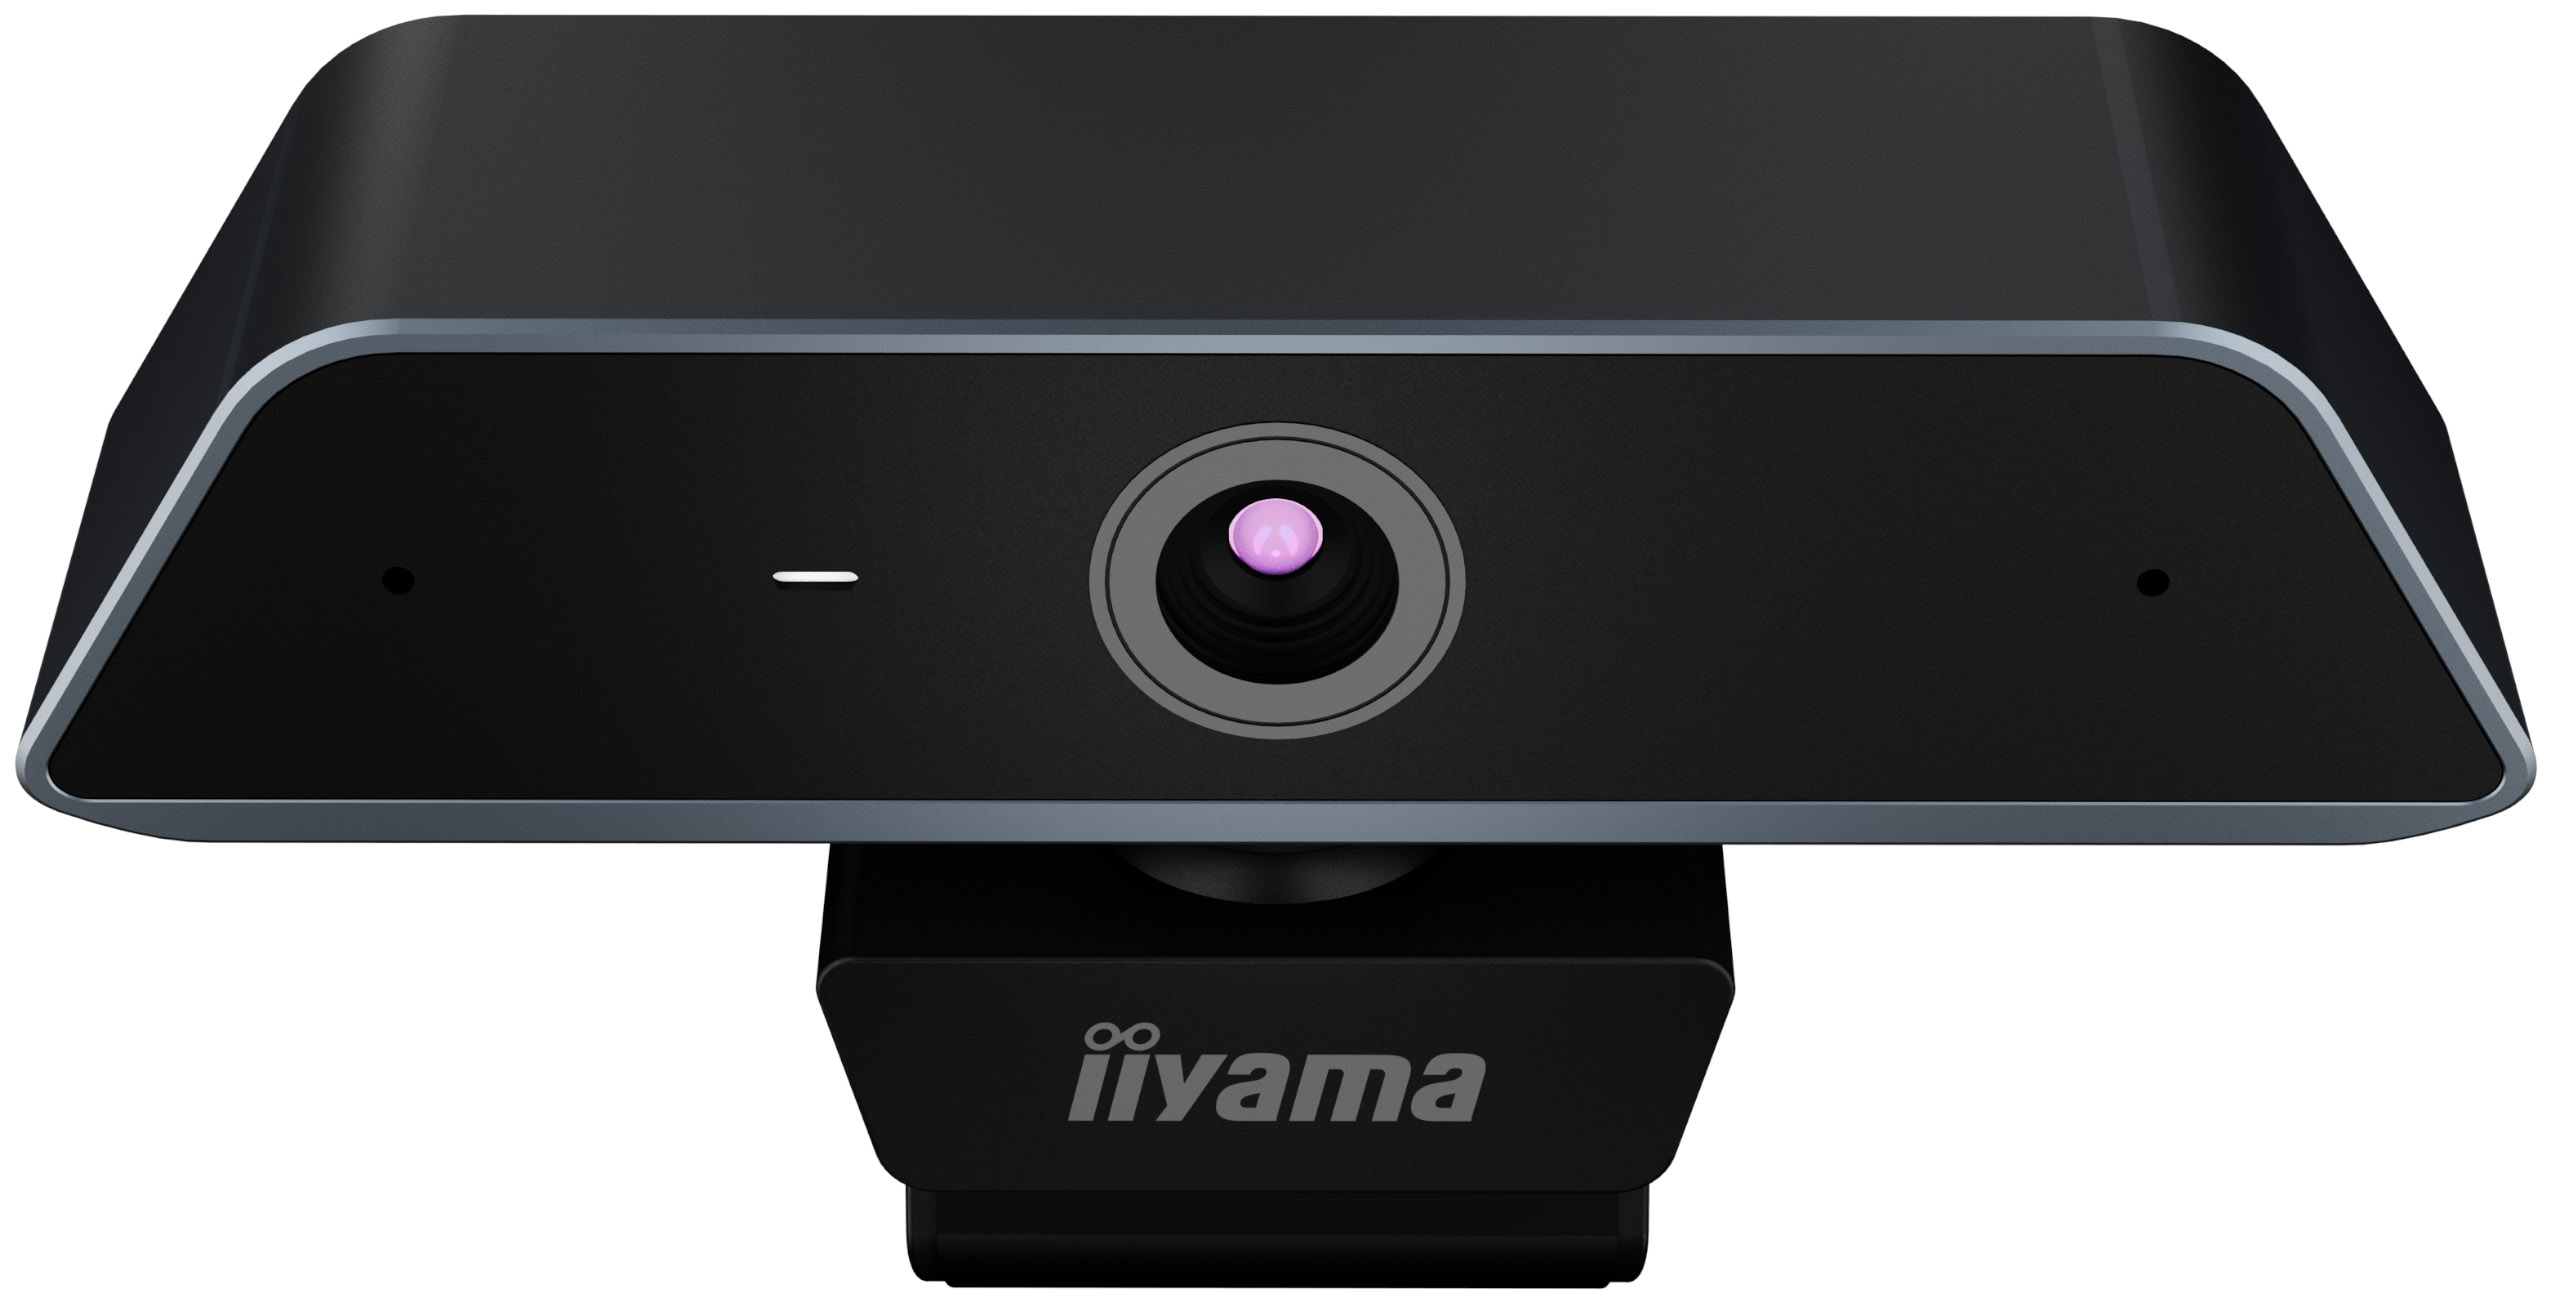 iiyama UC CAM80UM-1 - 4K huddle/conference webcam - 13MP - USB camera with microphone - 80° field of view - auto focus - small rooms